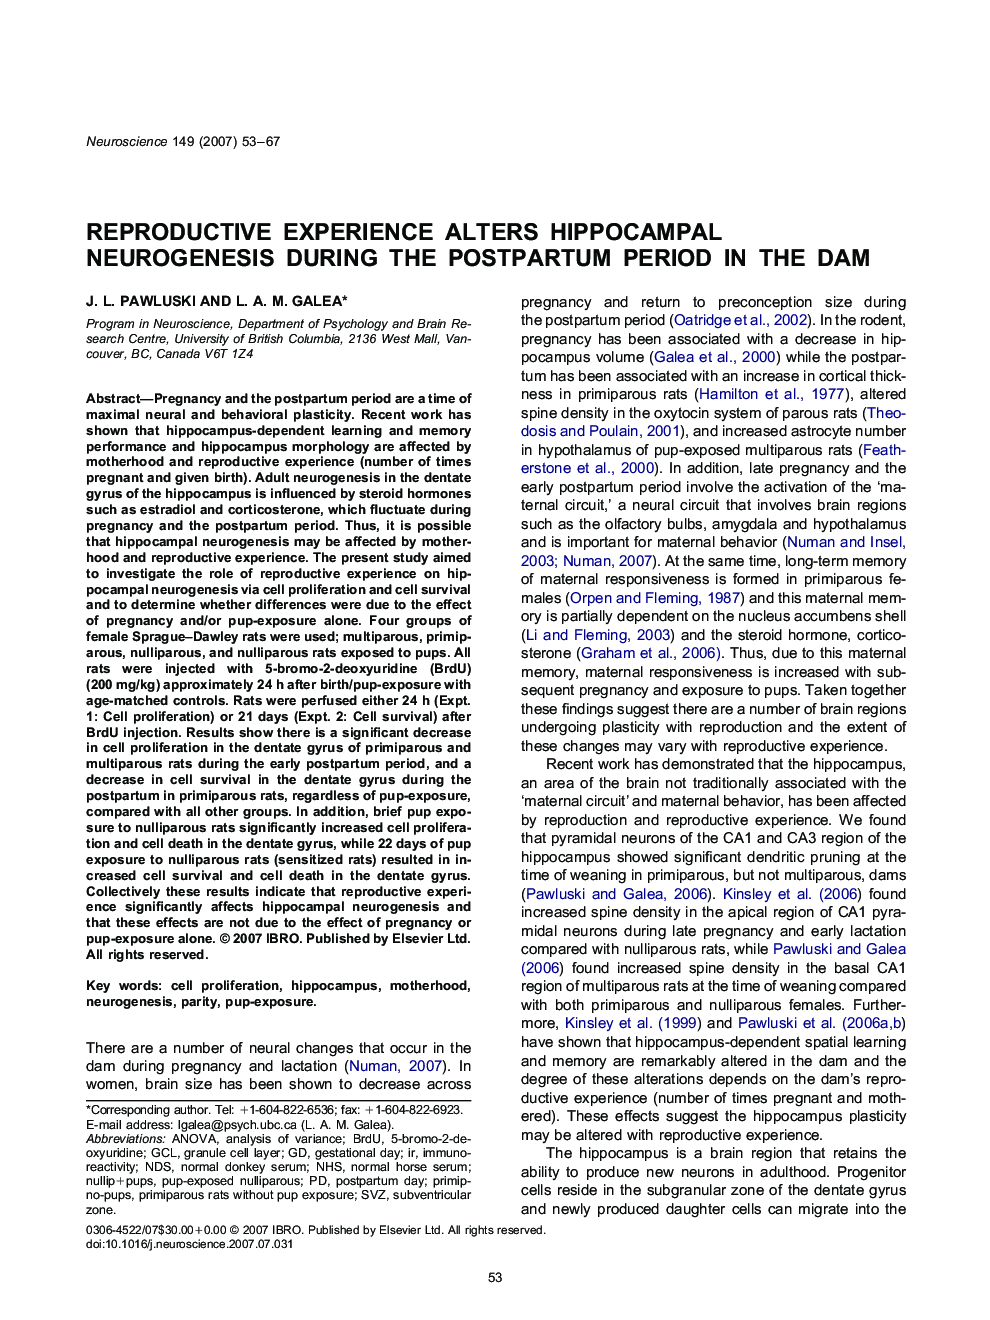 Reproductive experience alters hippocampal neurogenesis during the postpartum period in the dam